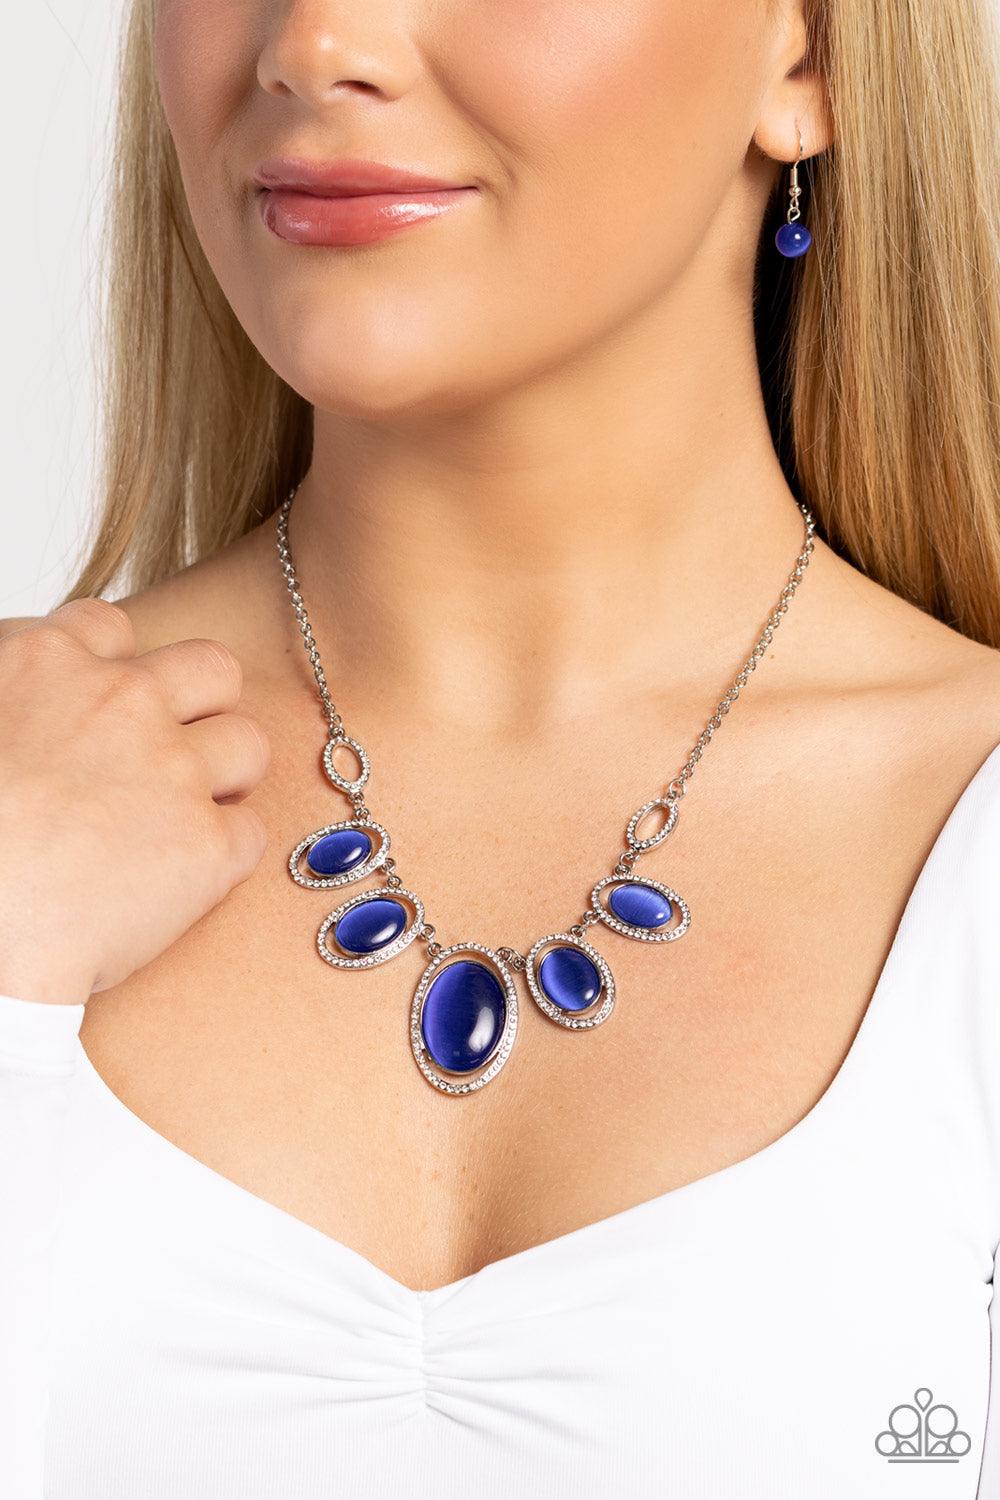 Paparazzi Accessories - A BEAM Come True - Blue Necklace - Bling by JessieK